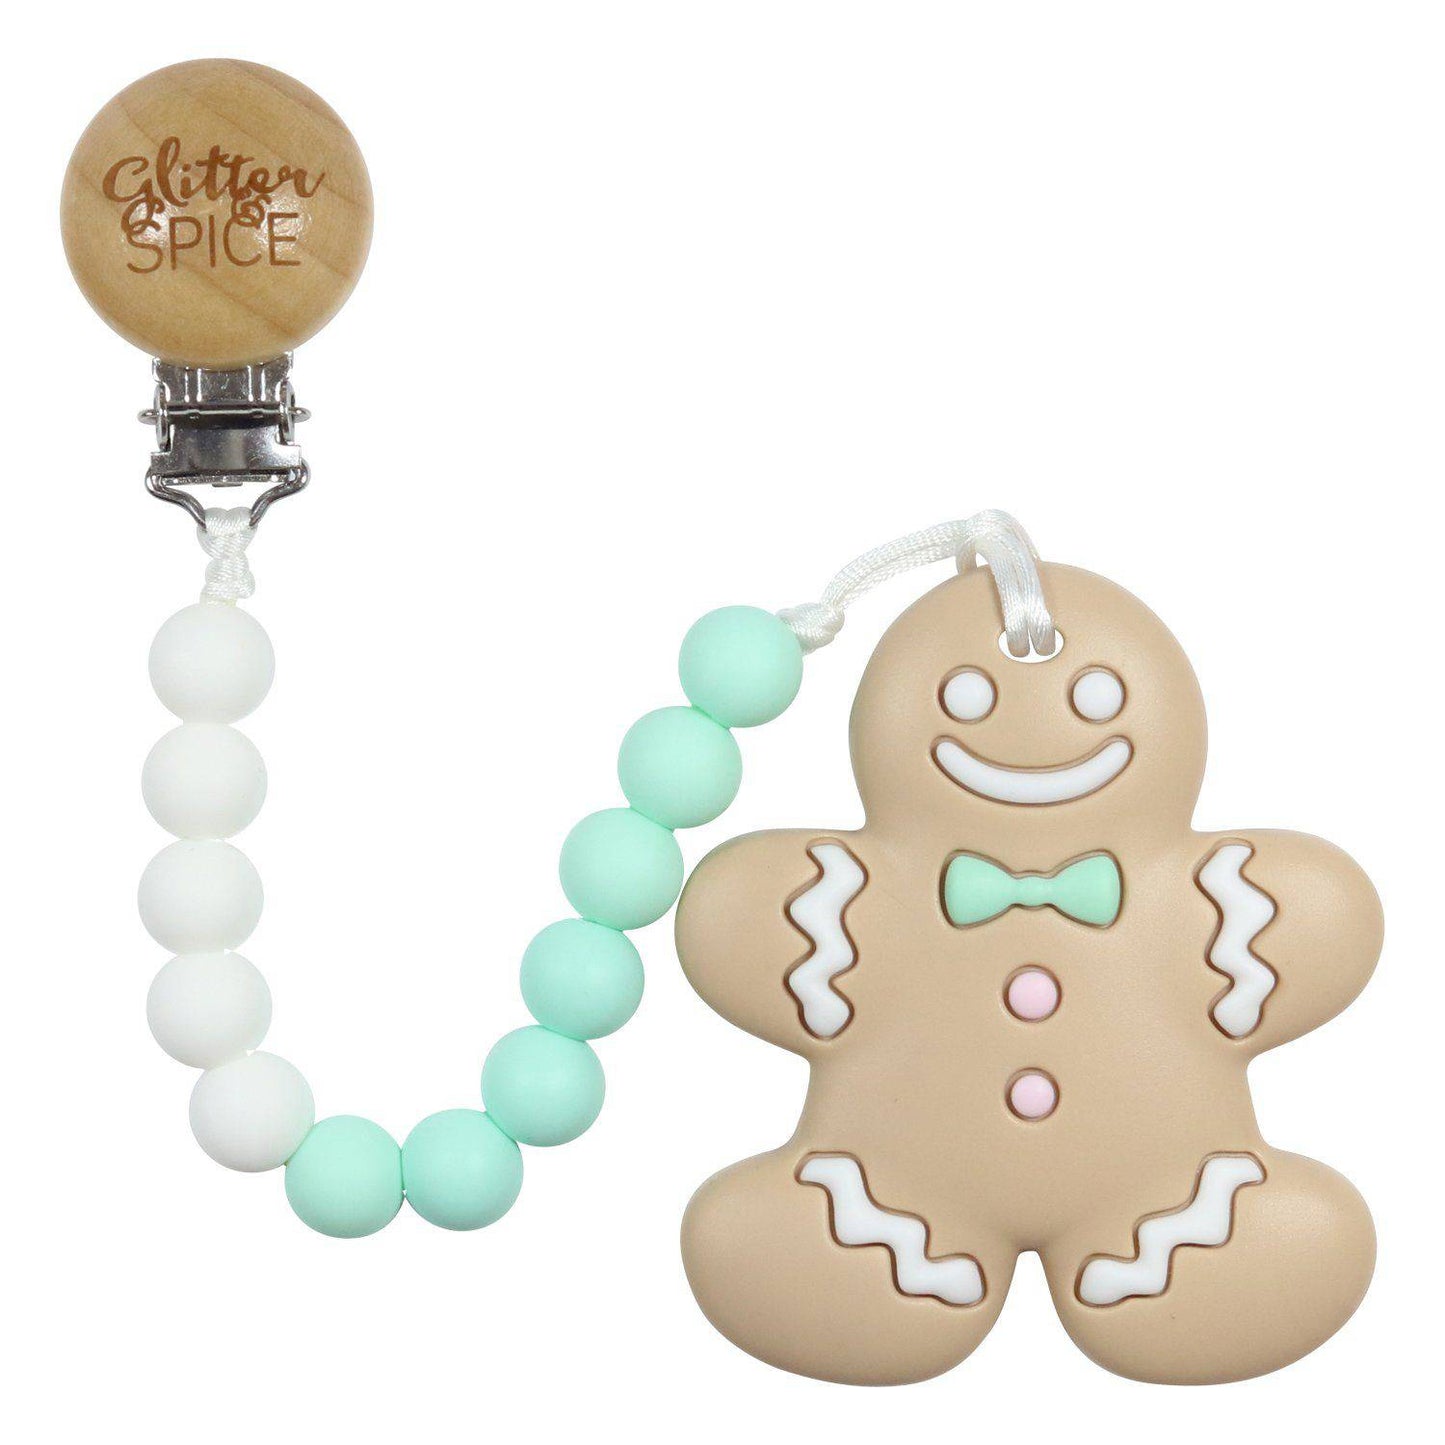 Glitter & Spice Gingerbread Silicone Teether with Pacifier Clip - Mint Glitter & Spice Gingerbread Silicone Teether with Pacifier Clip - Mint 